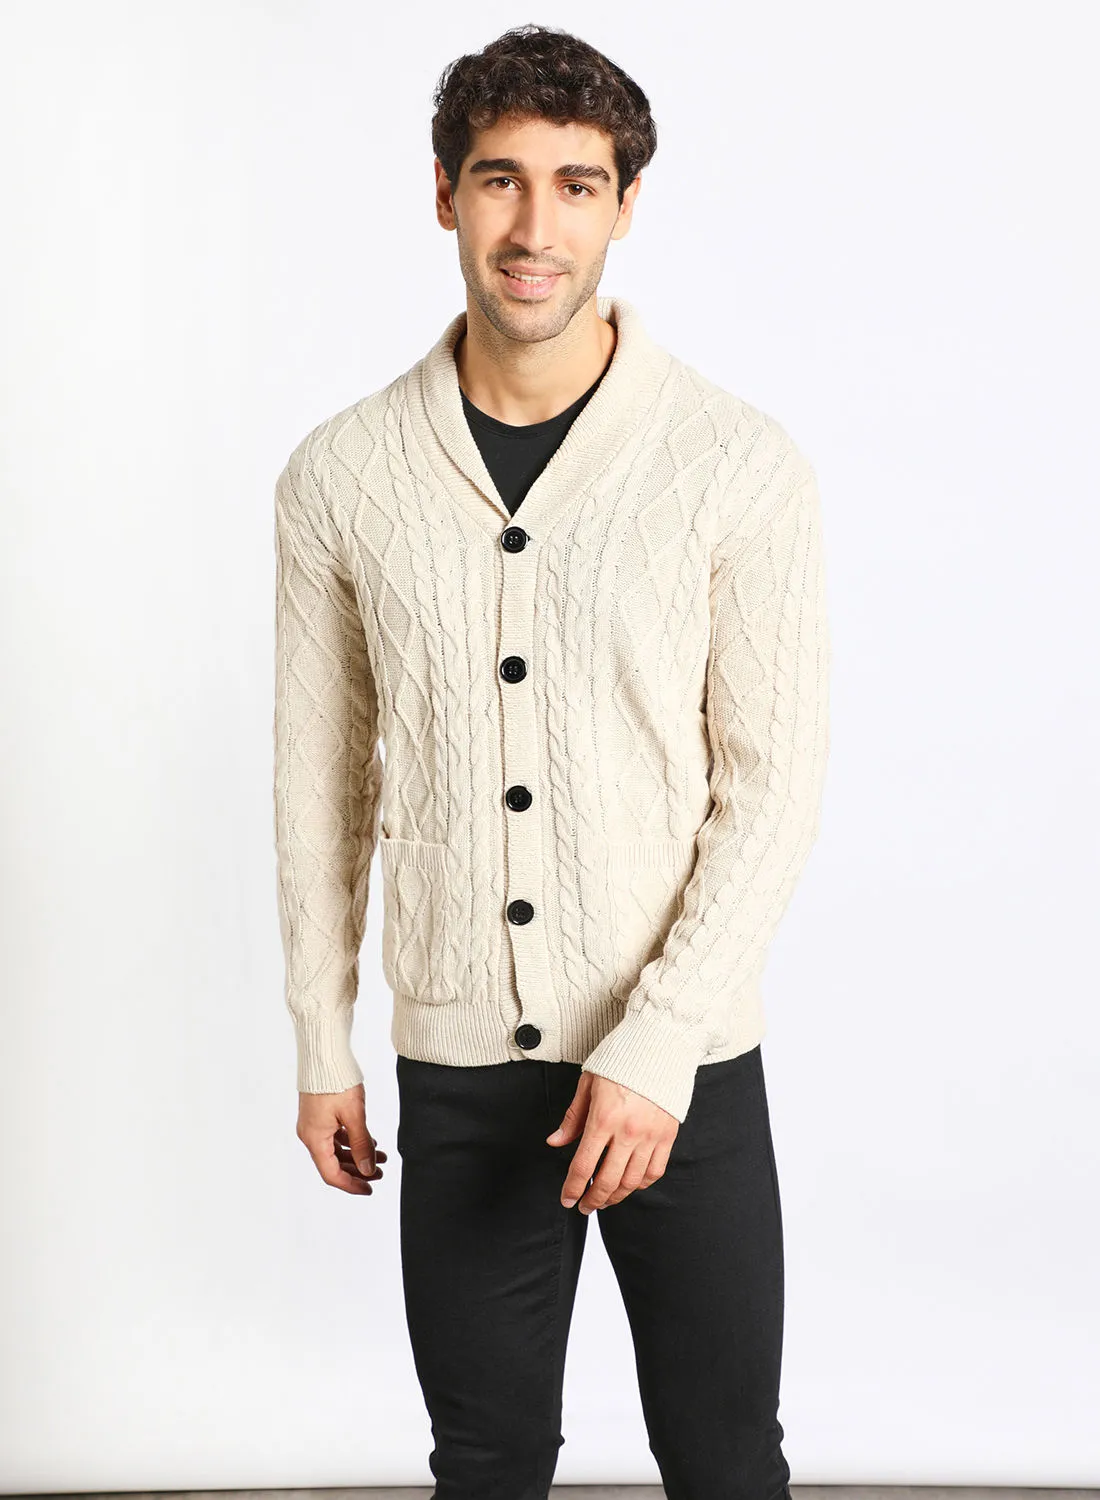 Noon East Men's Knitted Button Detailed Front Open Full Sleeves Collar Cardigans For Winters , Cable Design With 2 Front Pockets Beige